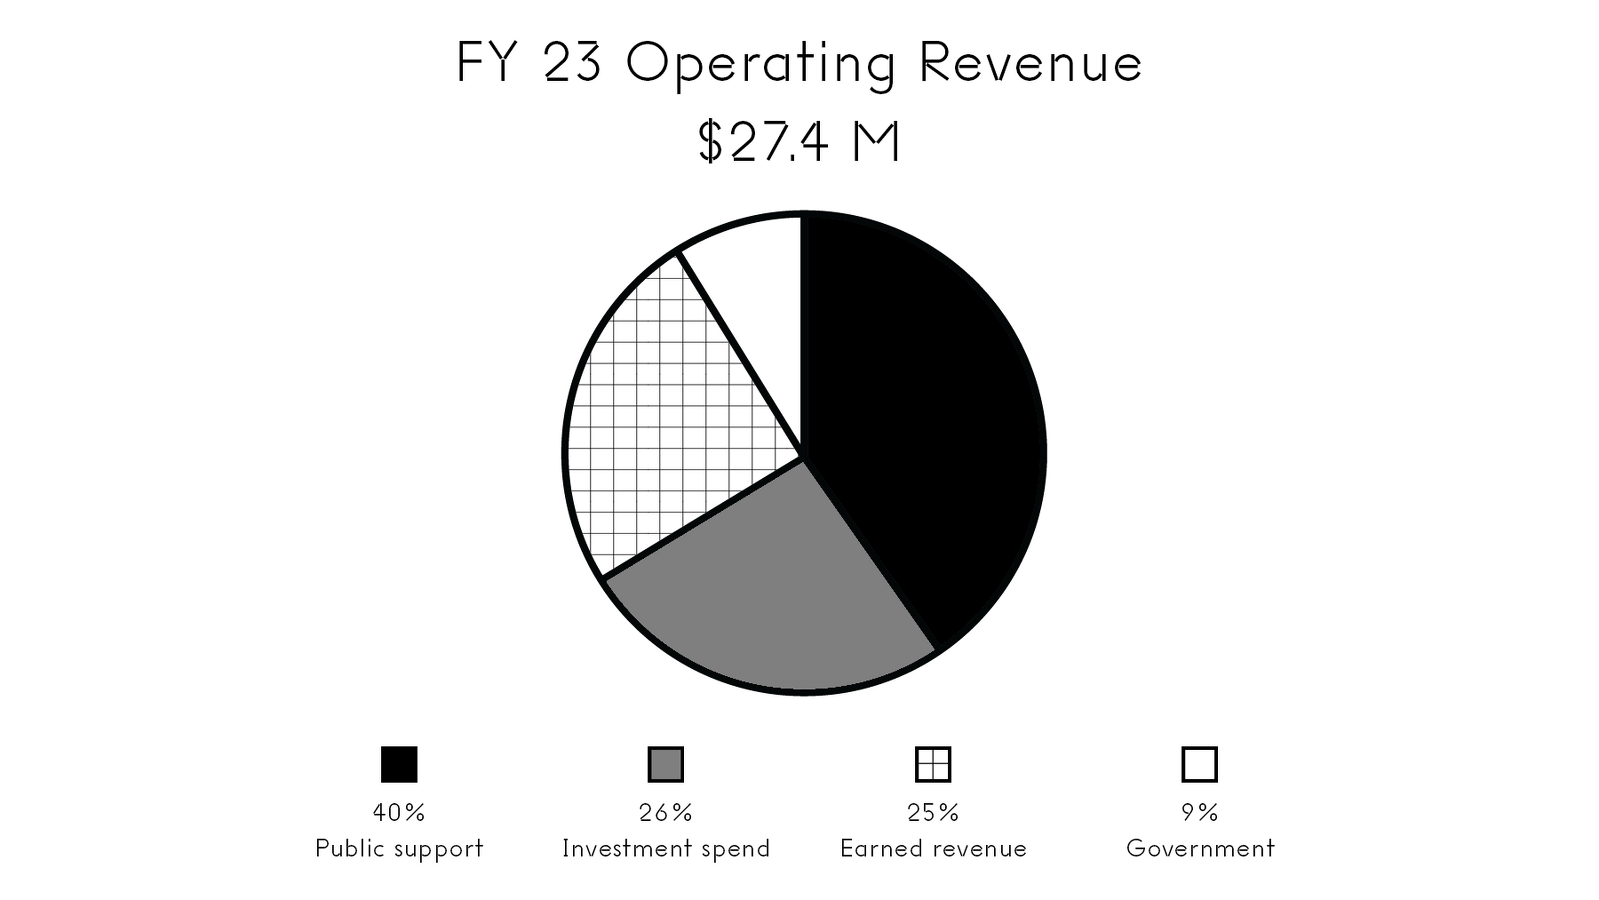 A pie chart on fiscal year 2023's operating revenue of $27.4 million, with 40% from public support; 26% from investment spending; 25% from earned revenue; and 9% from the government.